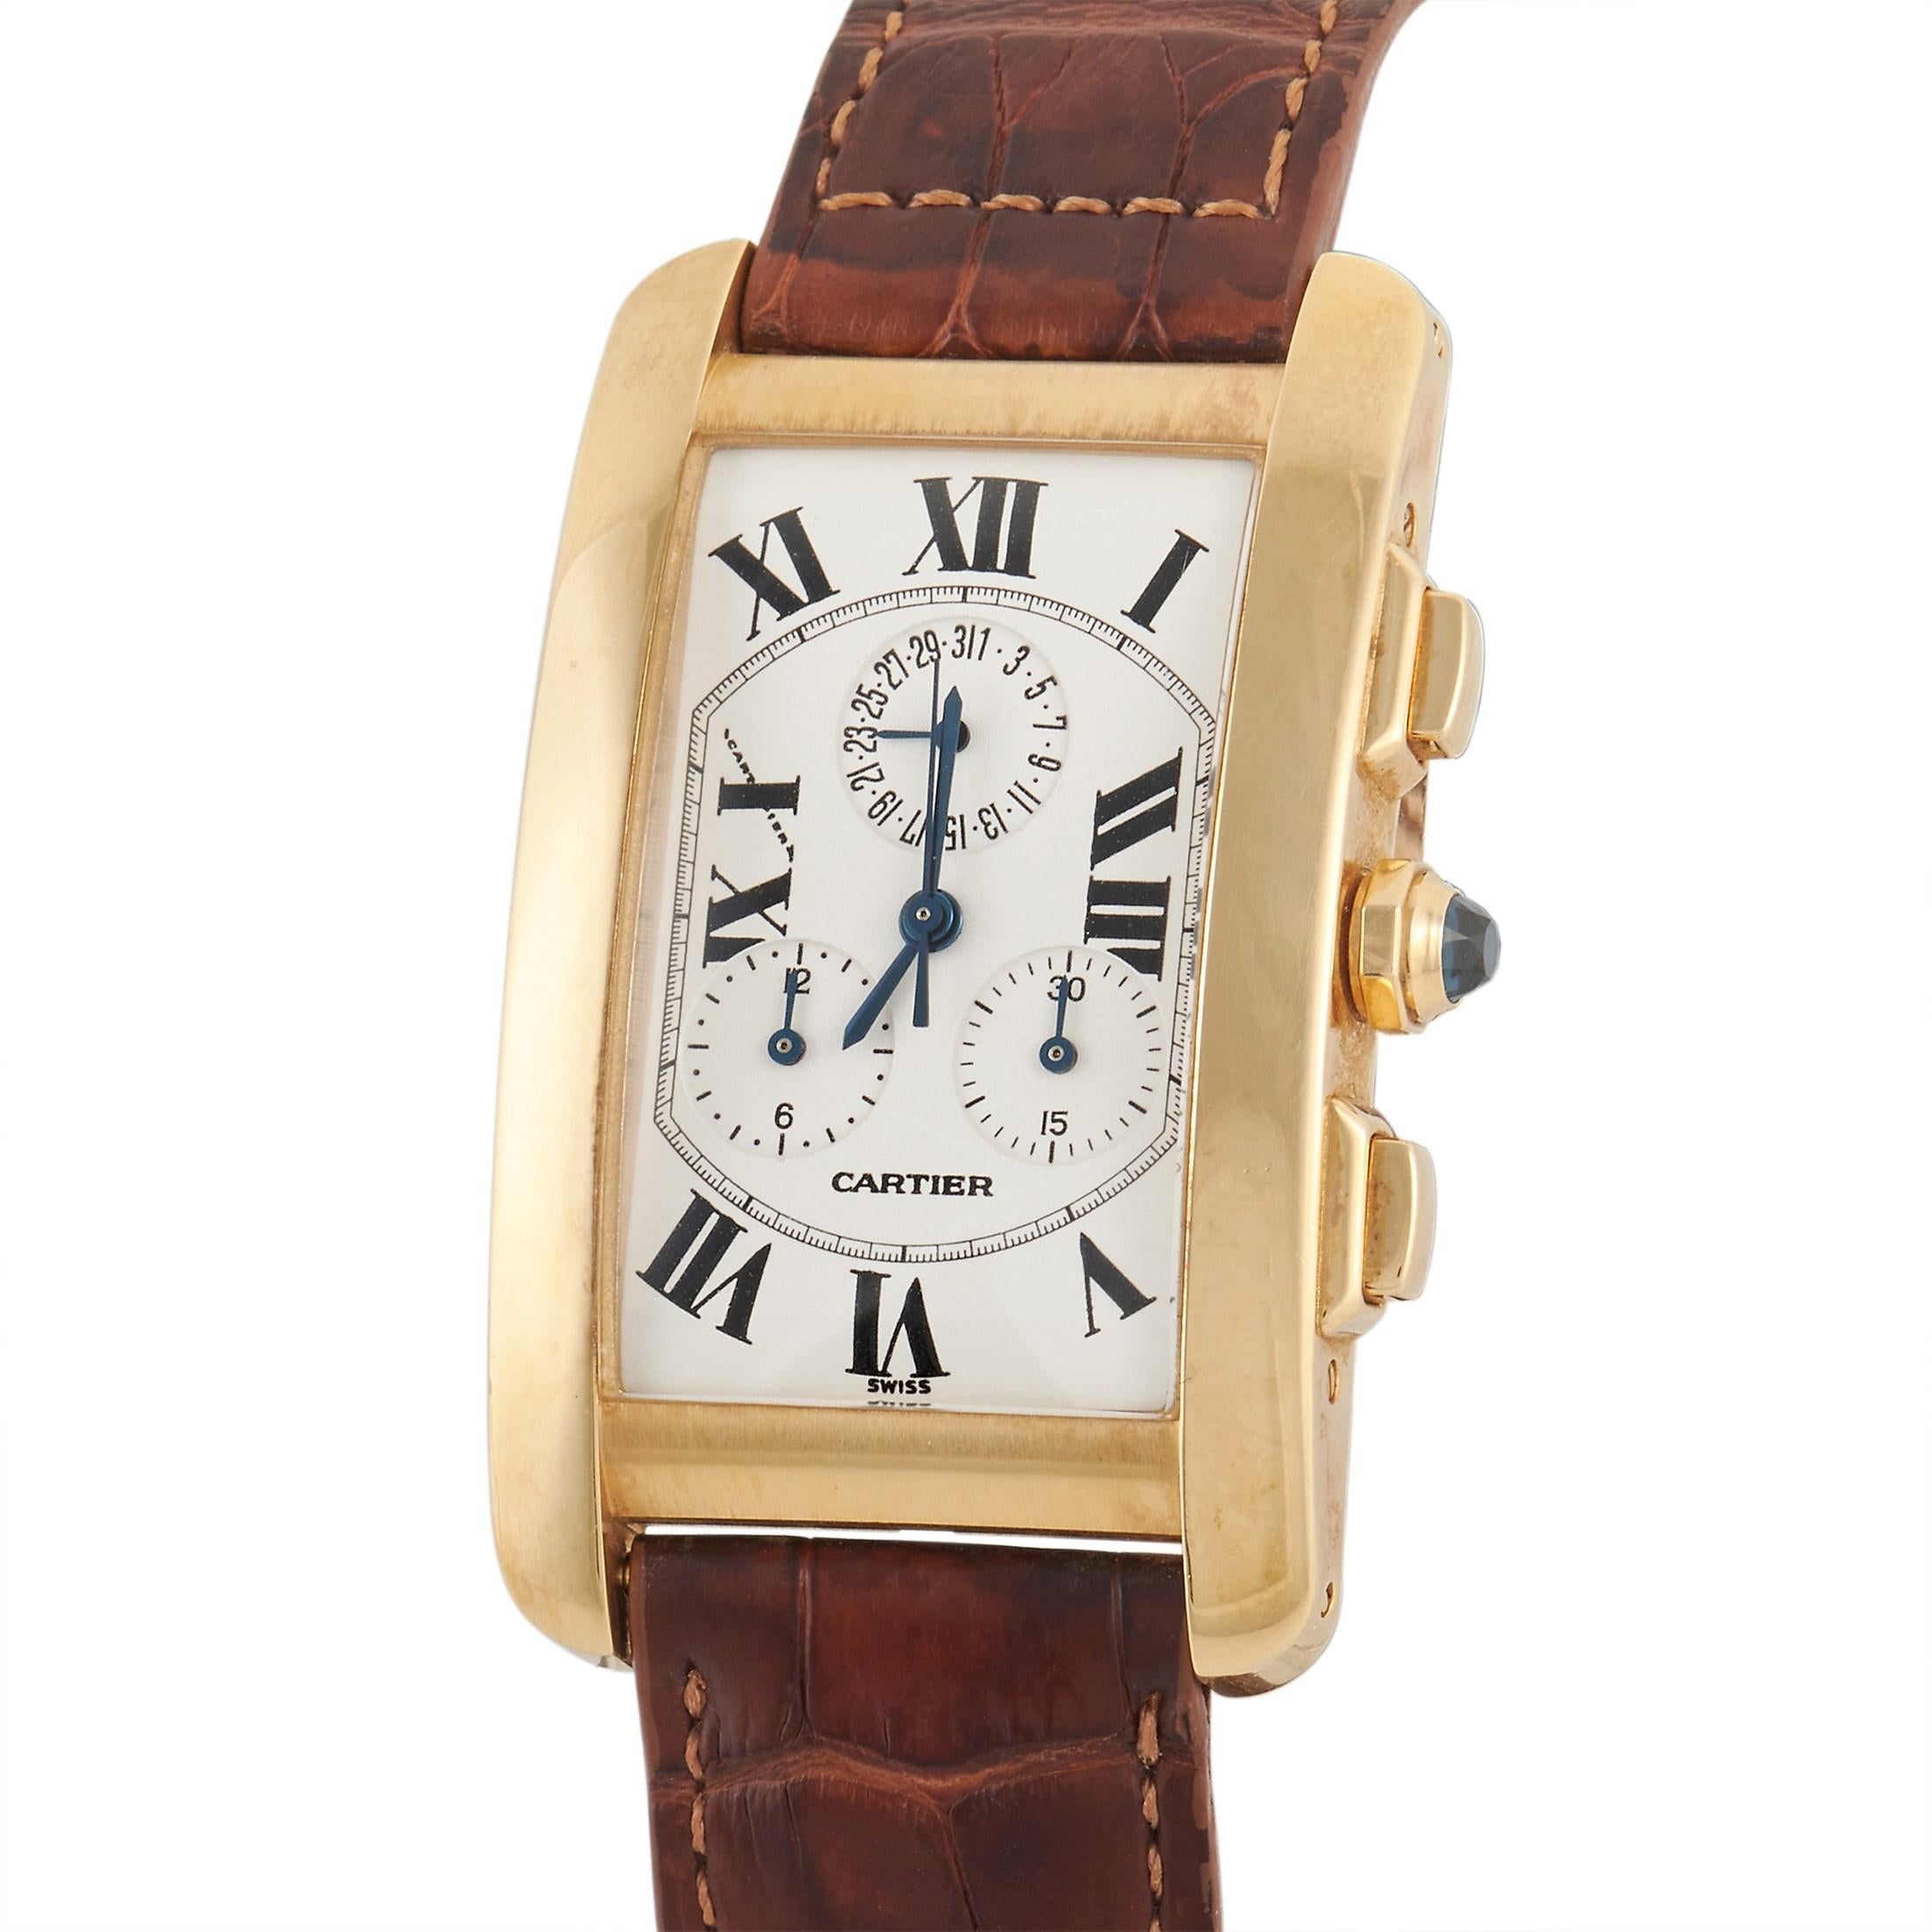 The Cartier Tank Americaine Chronograph Watch, reference number 1730, has a slim profile that is inherently sophisticated.

This timepiece begins with a rounded rectangular case that measures 26mm x 36mm and is crafted from opulent 18K Yellow Gold.